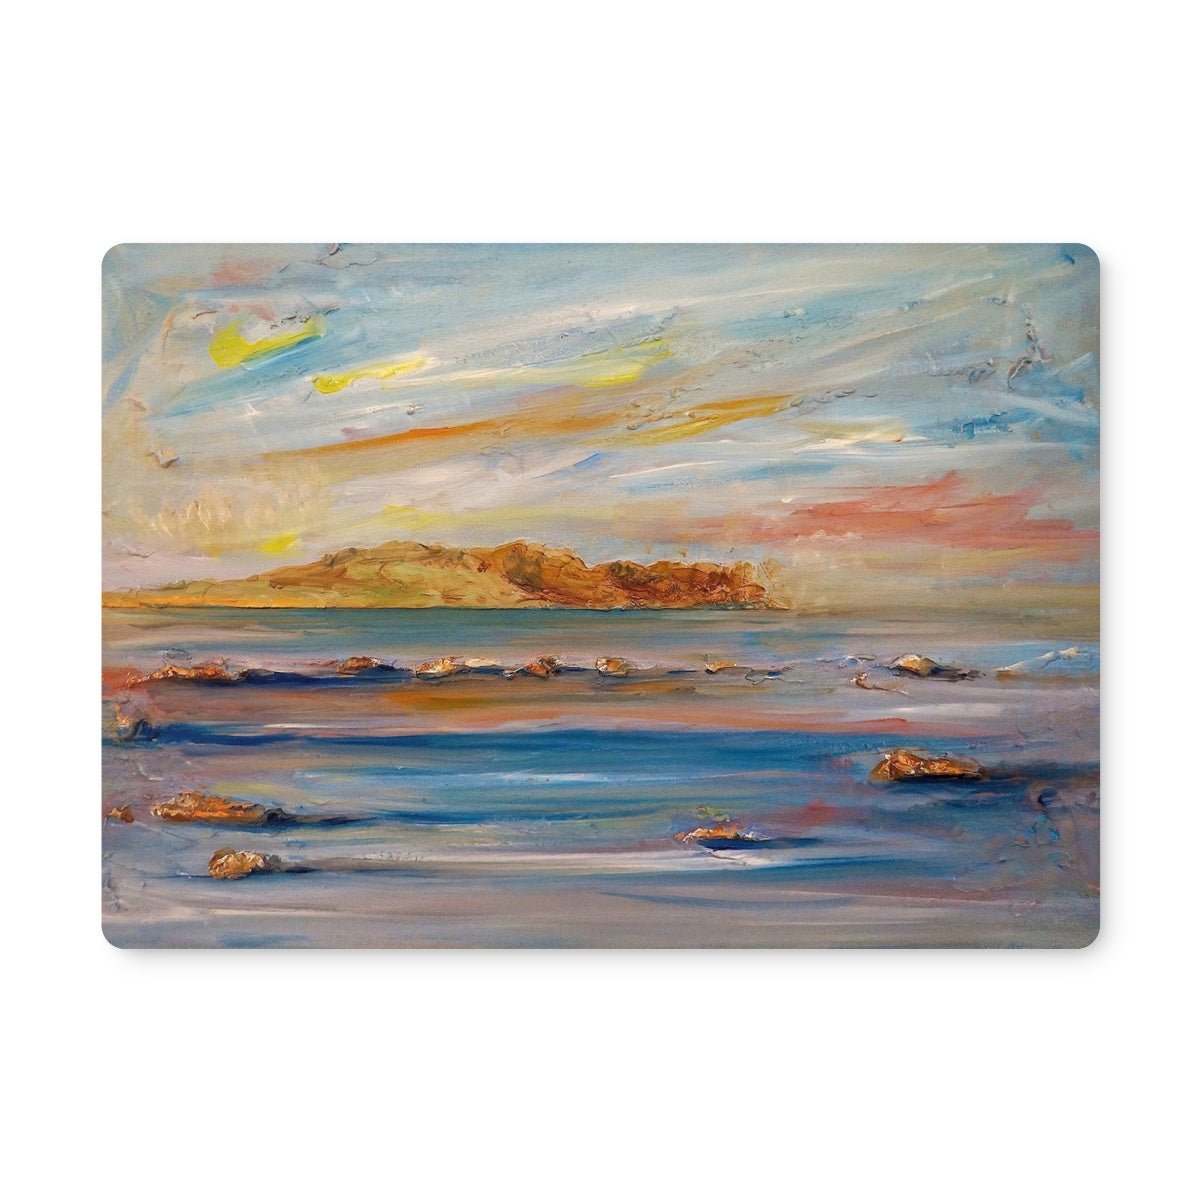 Tiree Dawn Art Gifts Placemat-Placemats-Hebridean Islands Art Gallery-4 Placemats-Paintings, Prints, Homeware, Art Gifts From Scotland By Scottish Artist Kevin Hunter